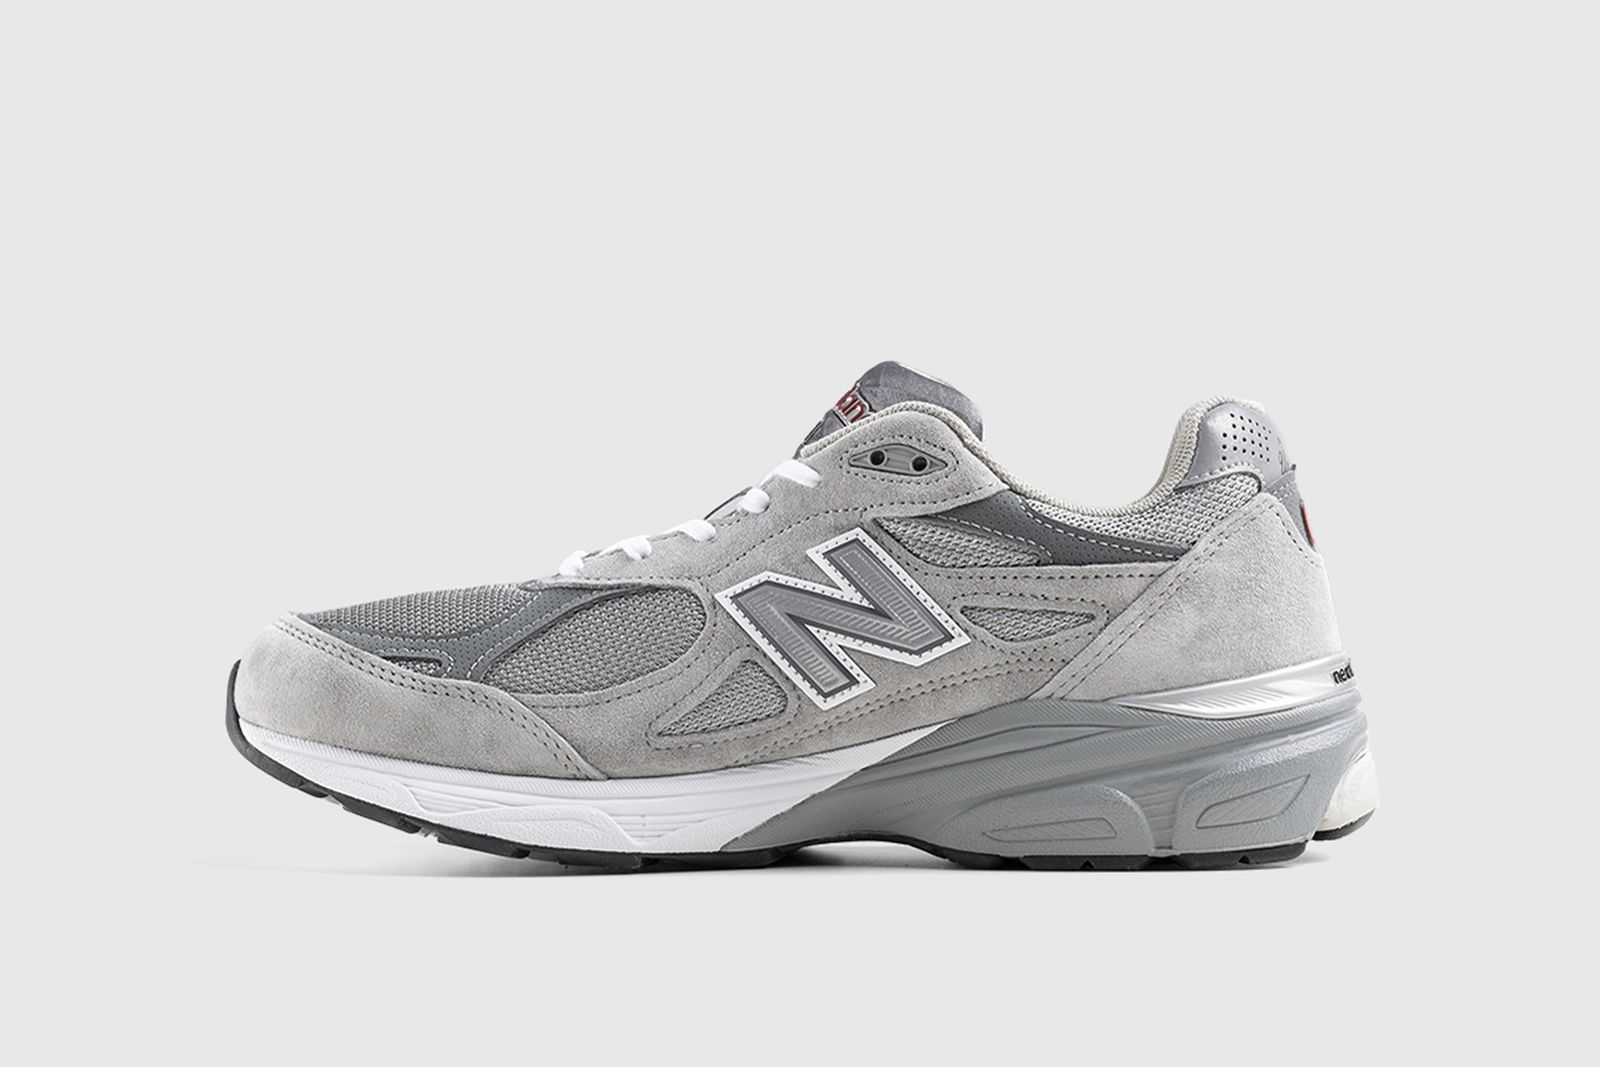 New Balance 990v3: Official Images & Where to Buy Right Now